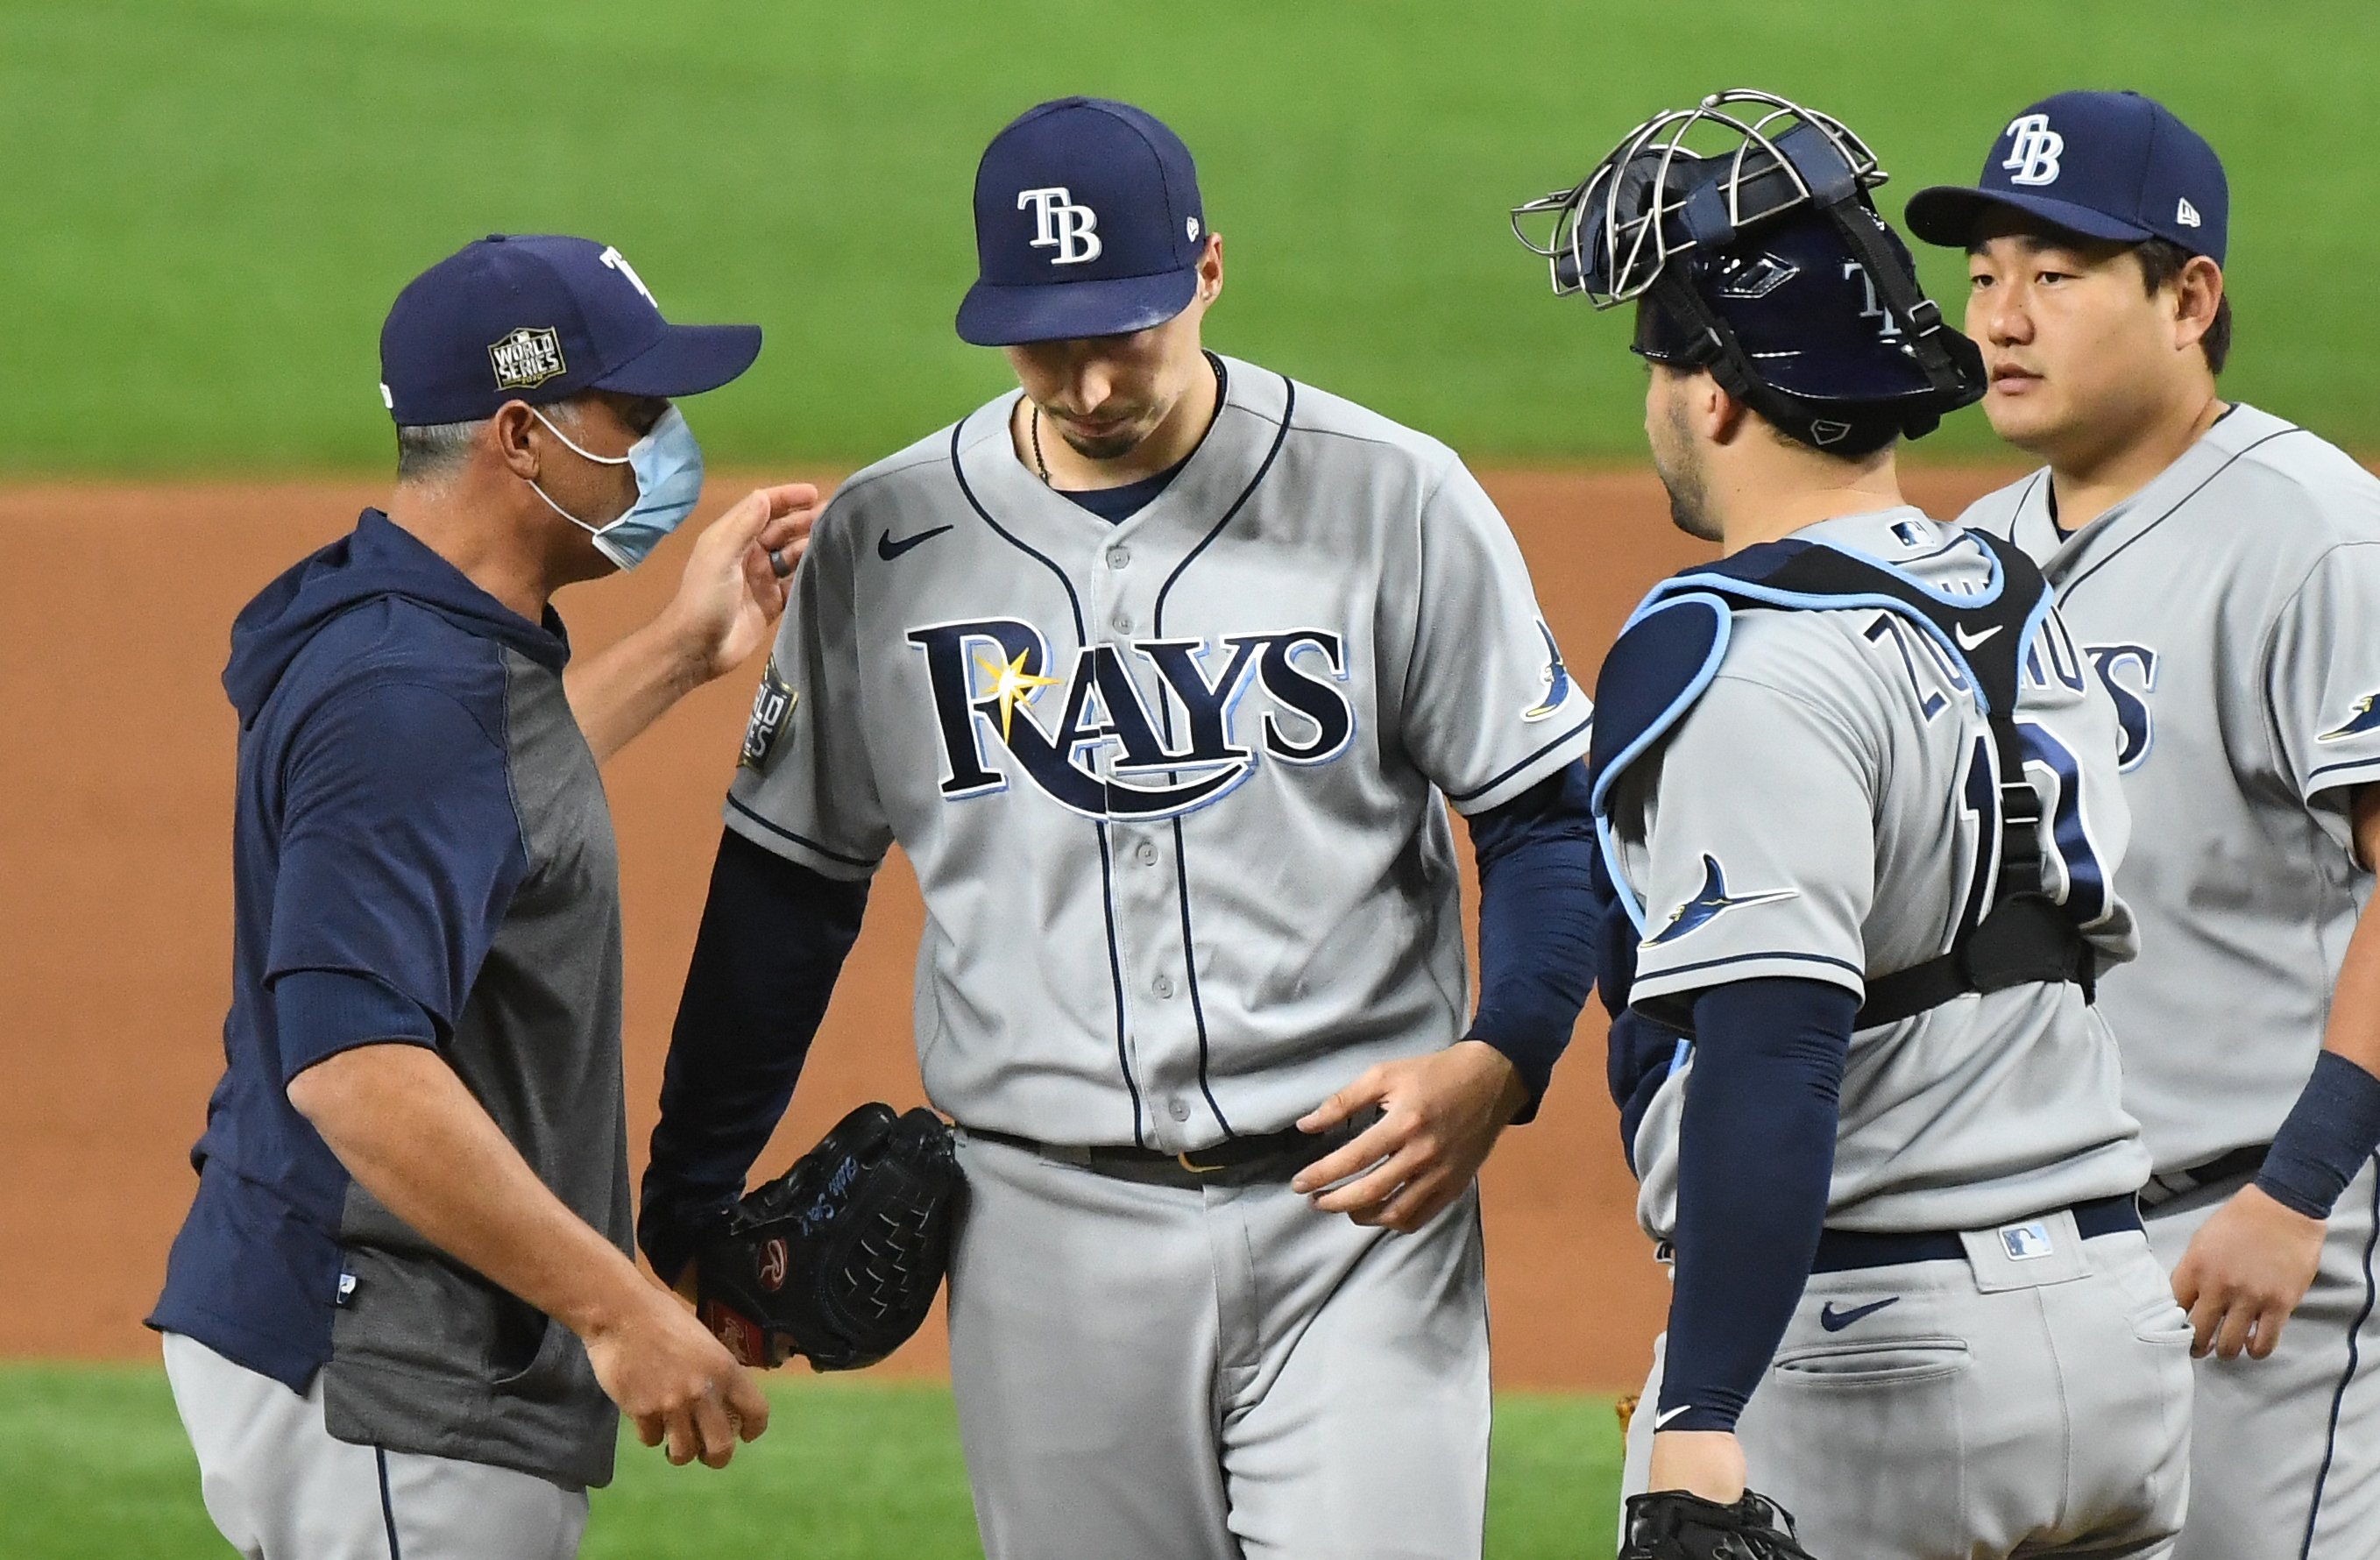 Tampa Bay Rays Manager Kevin Cash takes the ball from Blake Snell